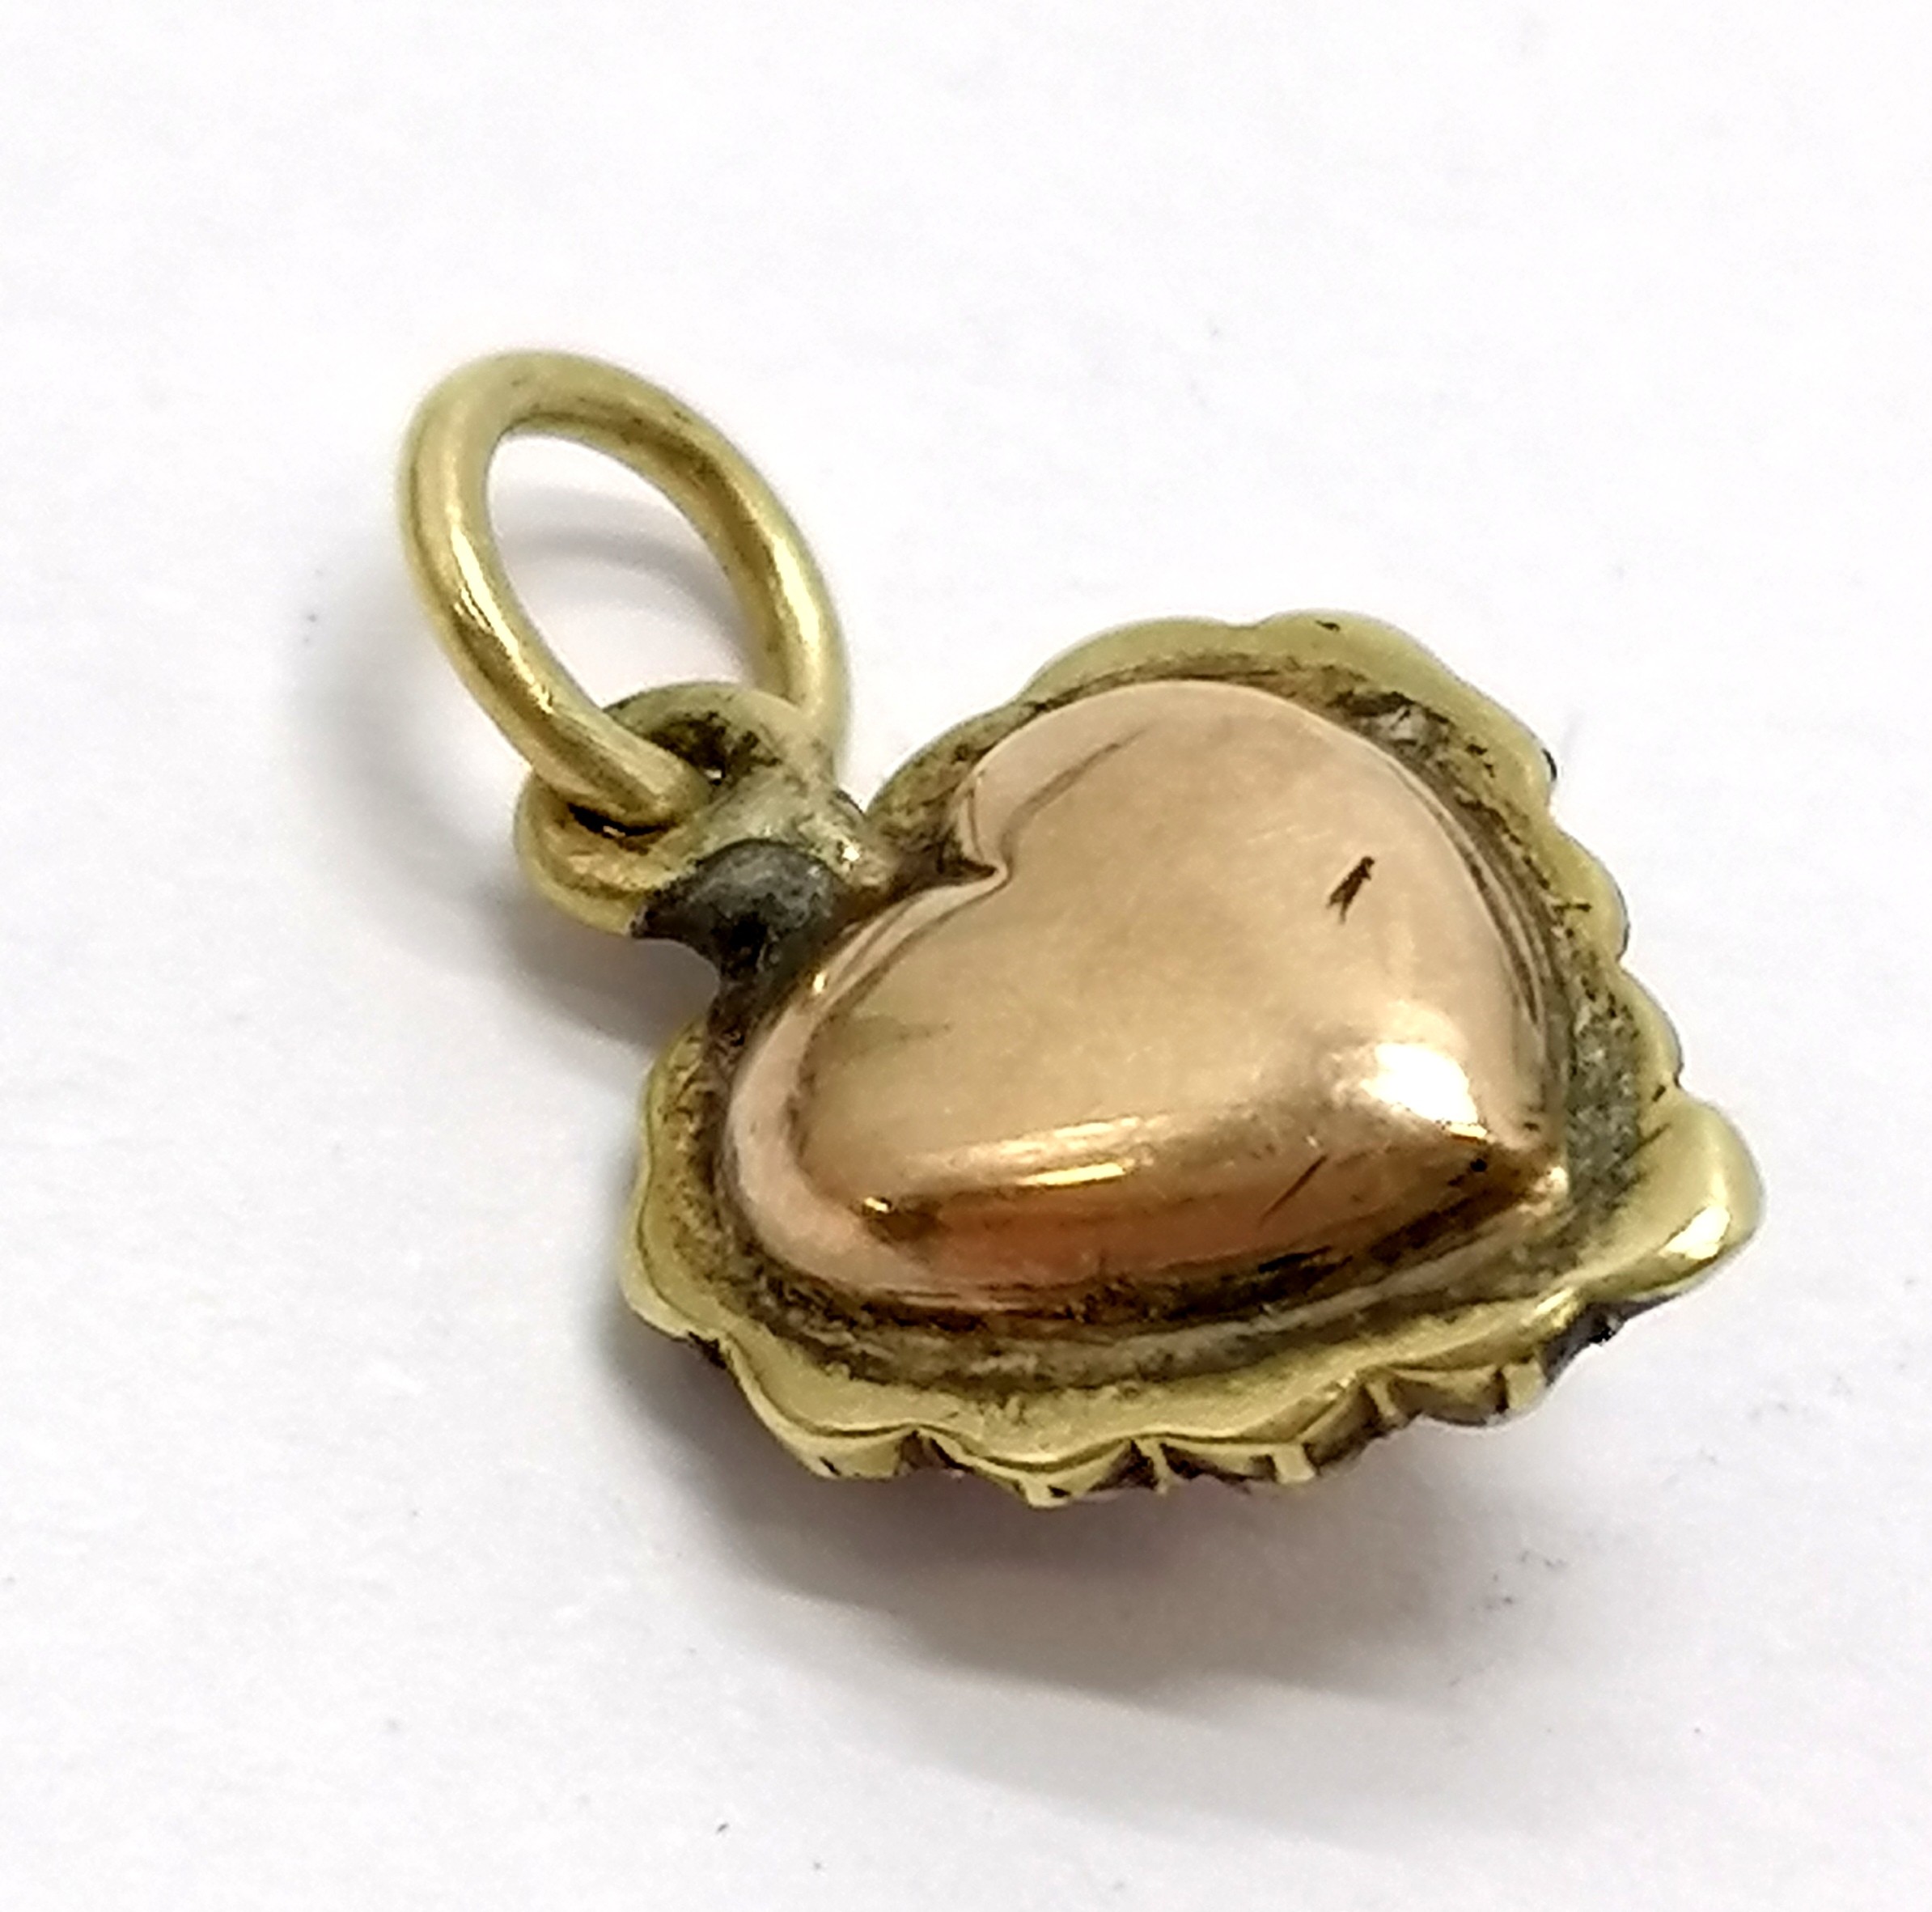 Unmarked antique gold heart small pendant with red enamel & pearl detail (1 missing) - 1.5cm - Image 2 of 2